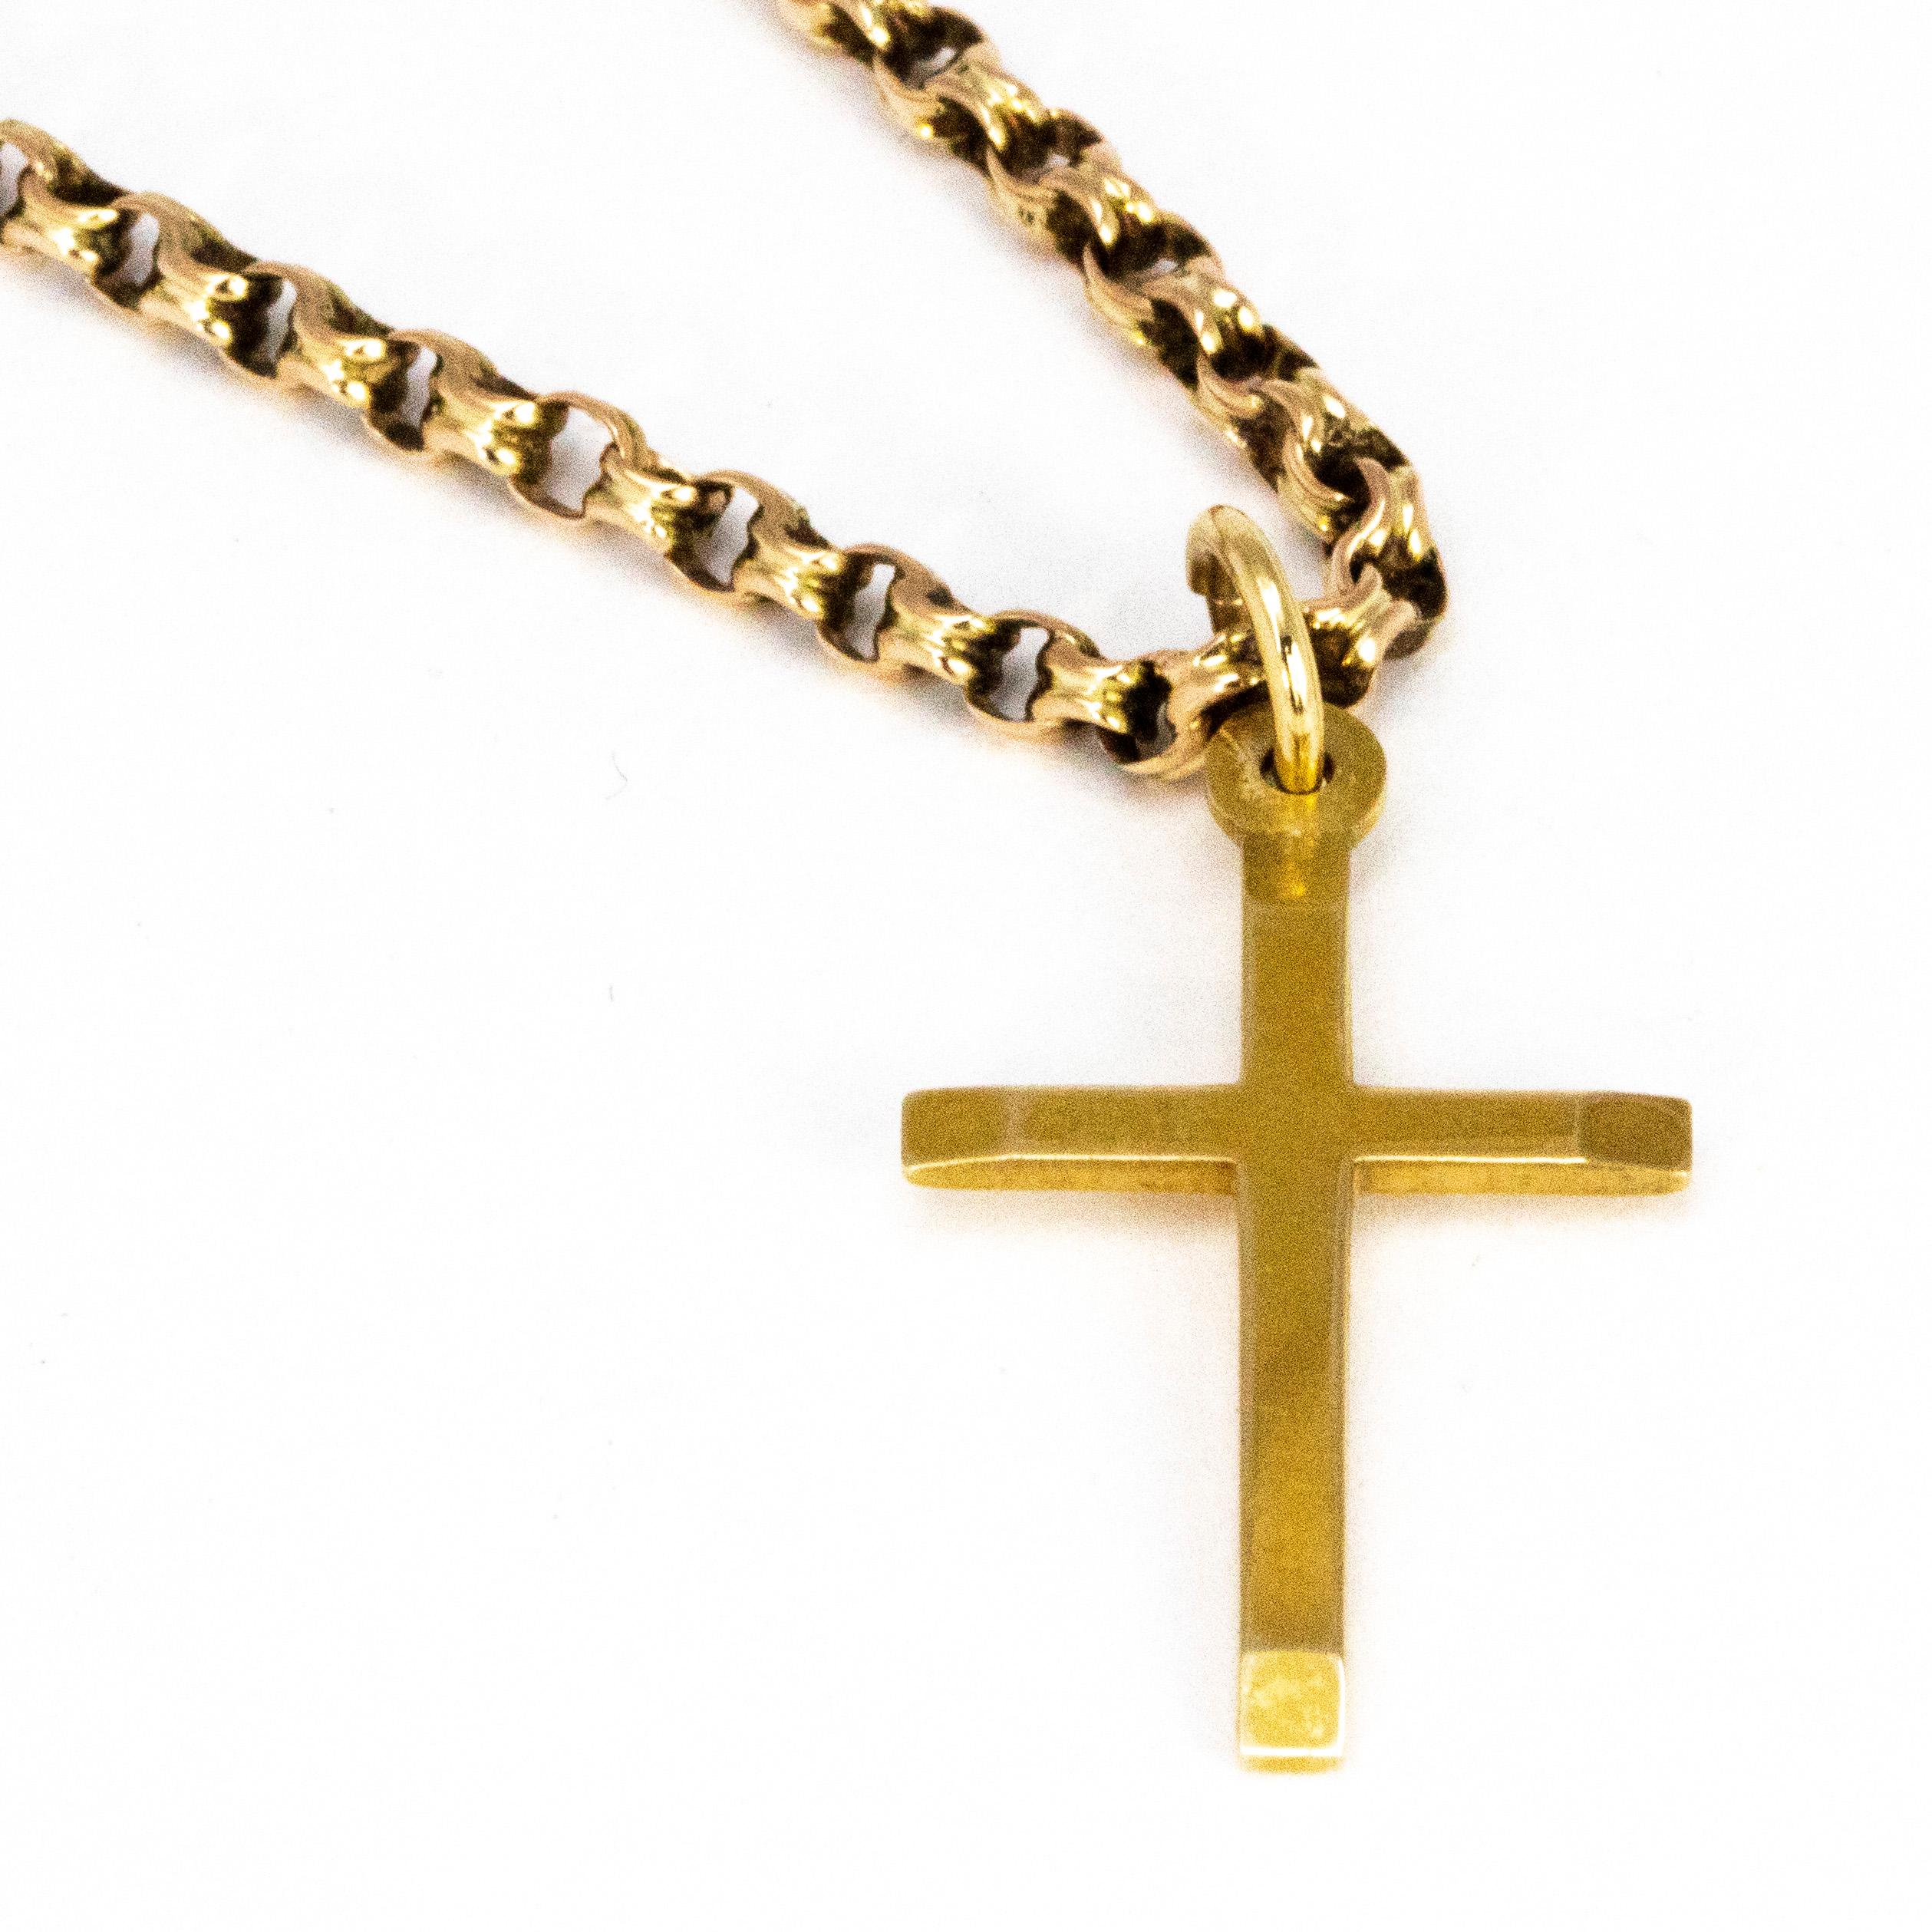 This 9ct gold belcher chain is fastened using a barrel clasp and the pendant which is fixed to it is a stylish cross. 

Length: 40cm
Cross Height: 25mm 

Weight: 7.2g